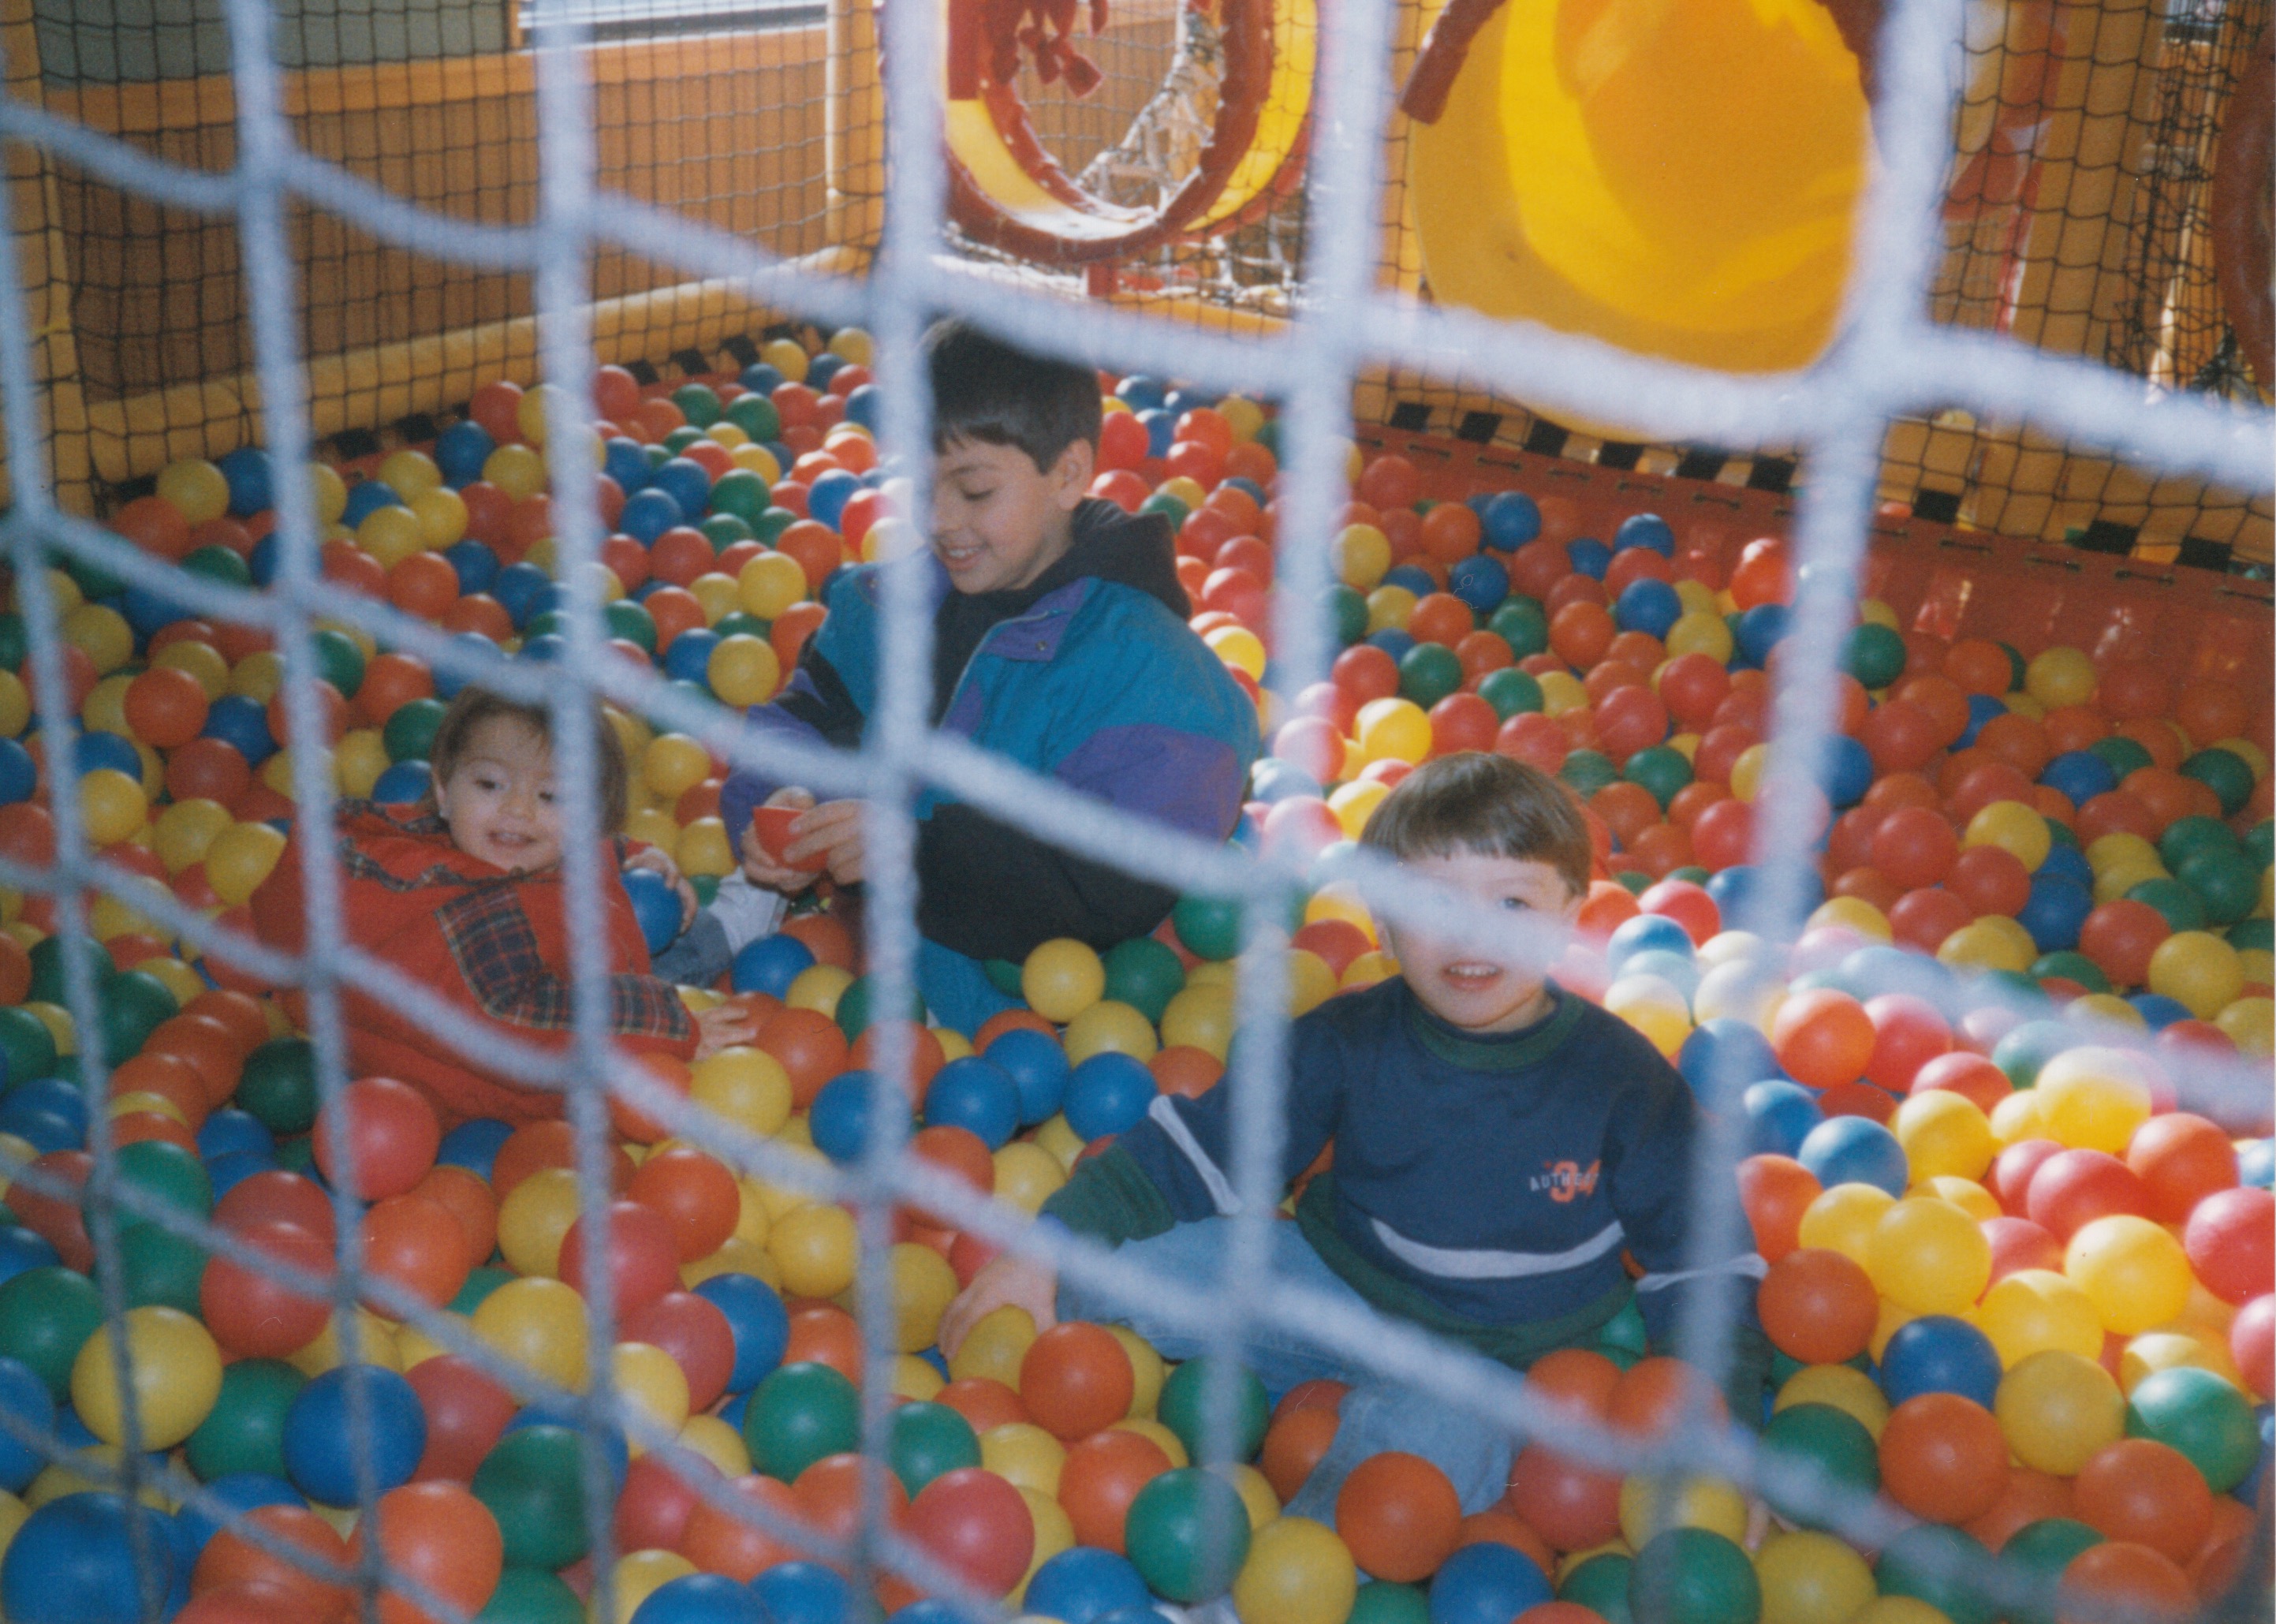 a picture of kristina, carlos, and julio in a ball pit